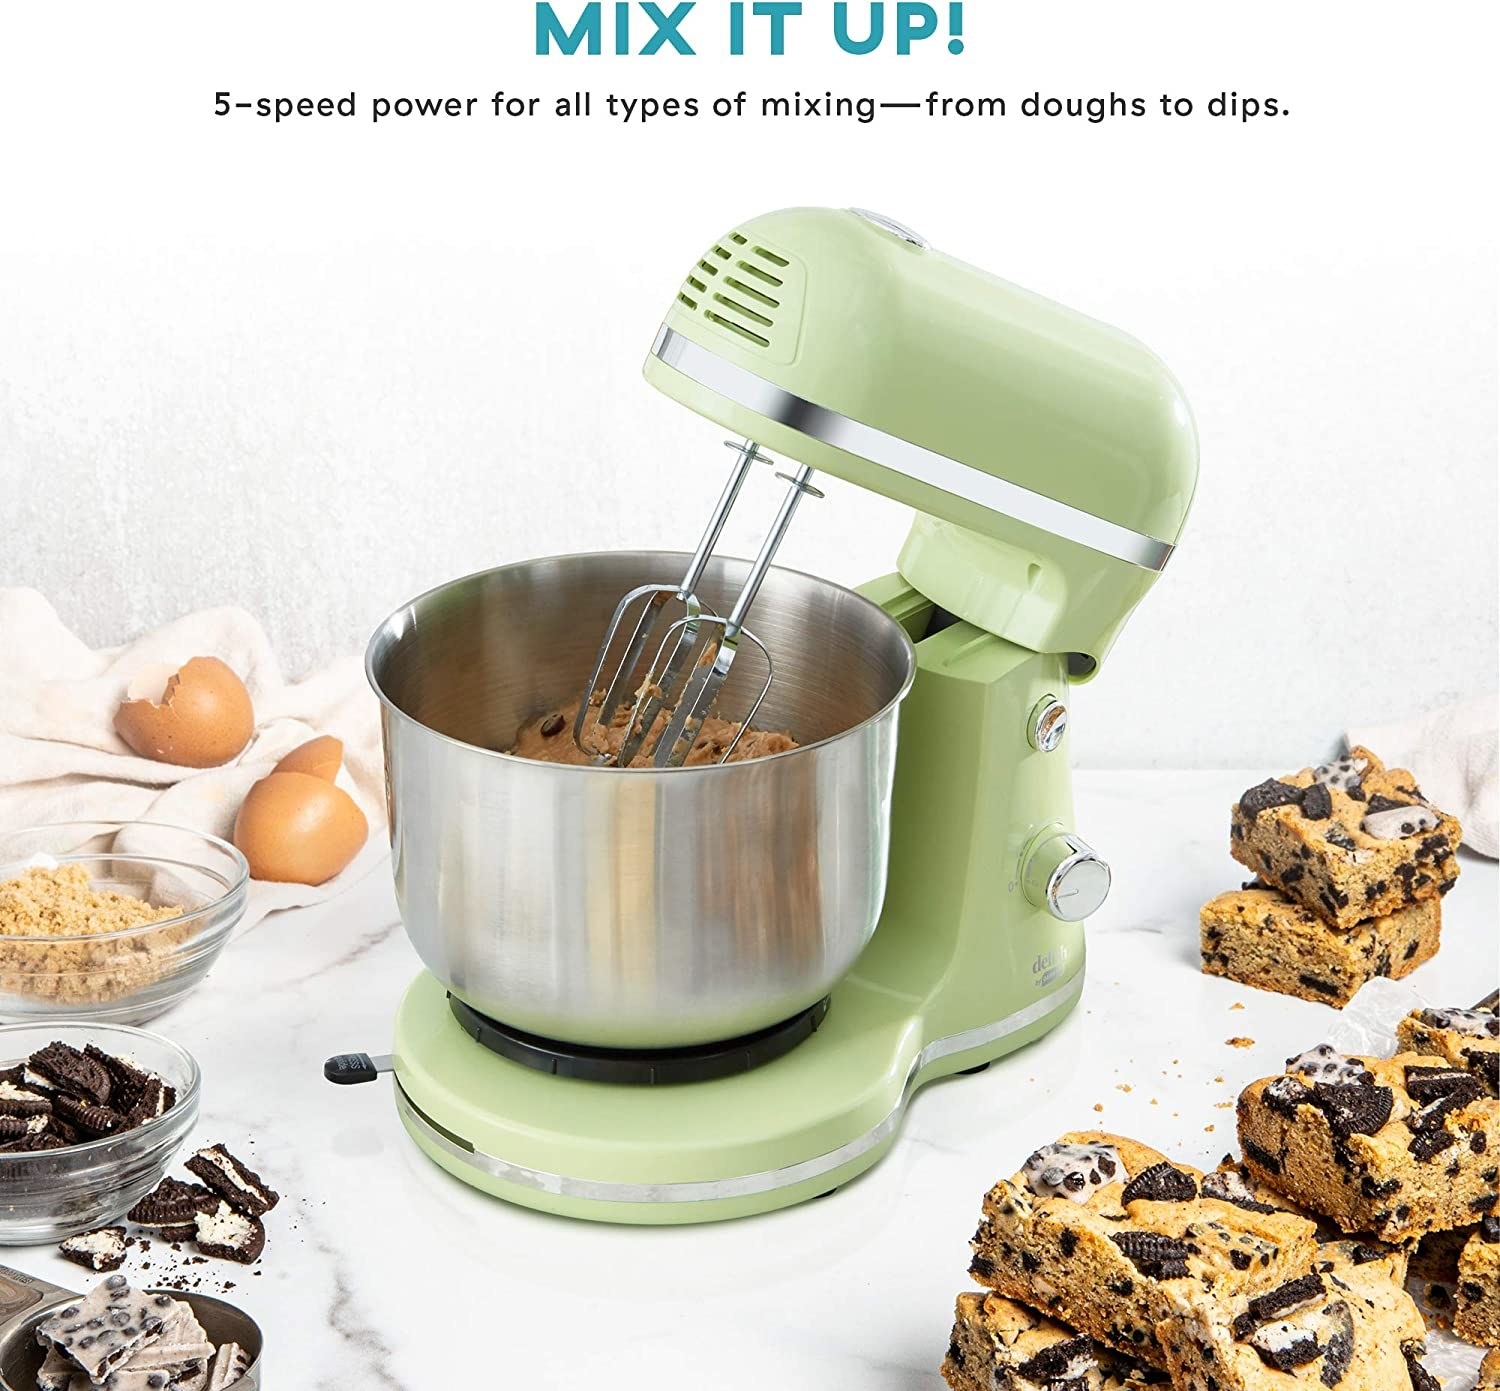 The stand mixer in pastel green